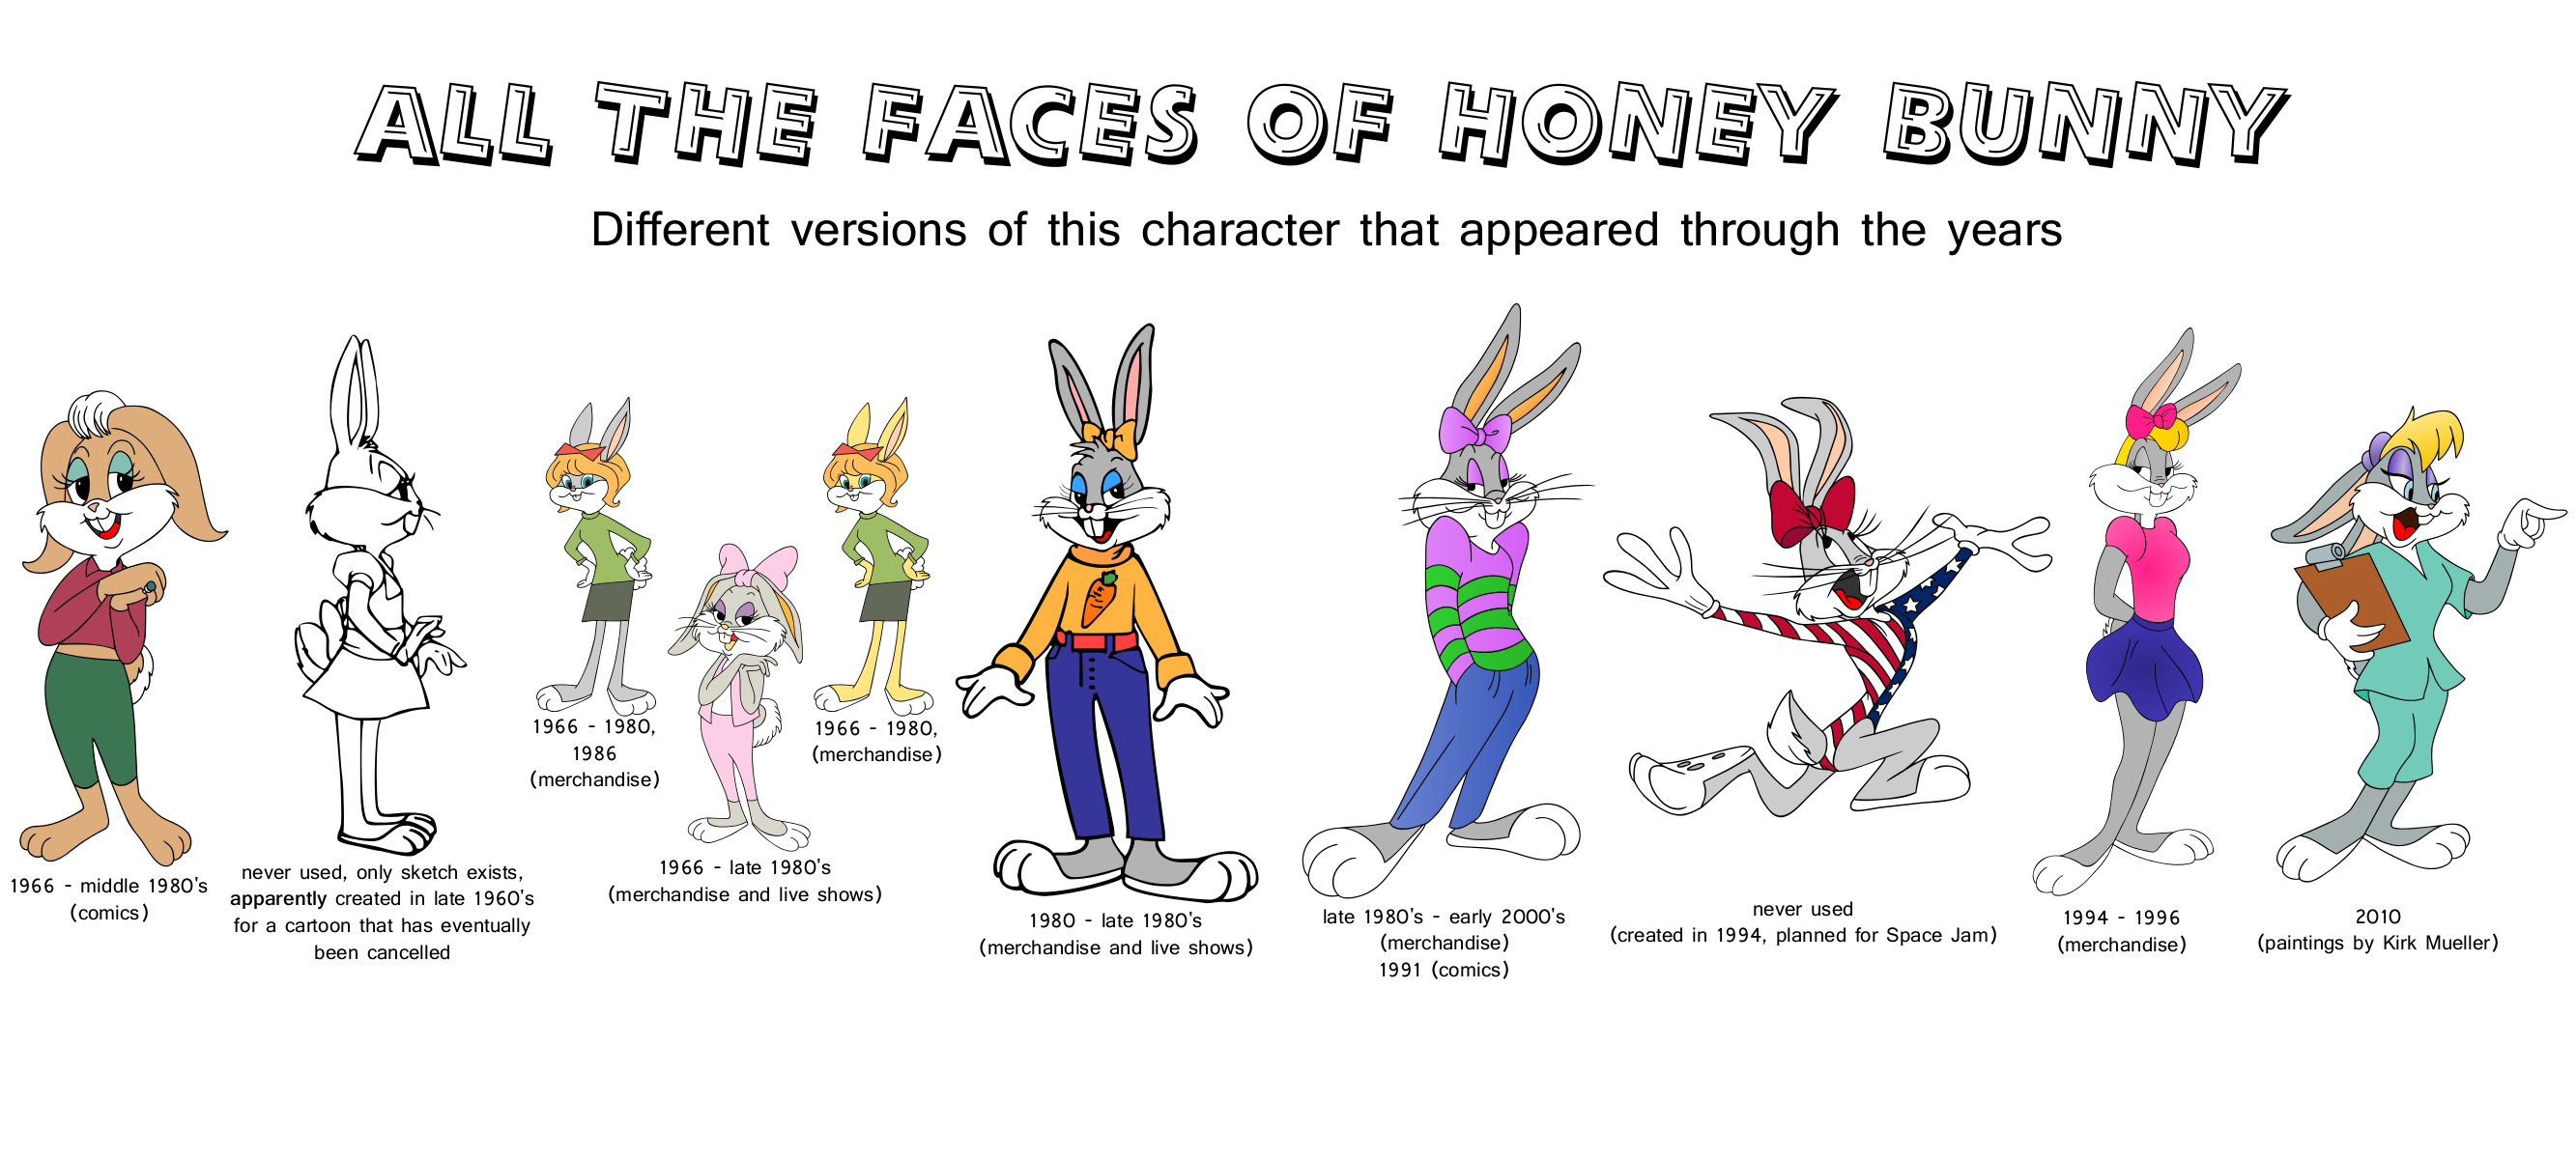 Questions, answers, myths, facts and curiosities about Honey Bunny